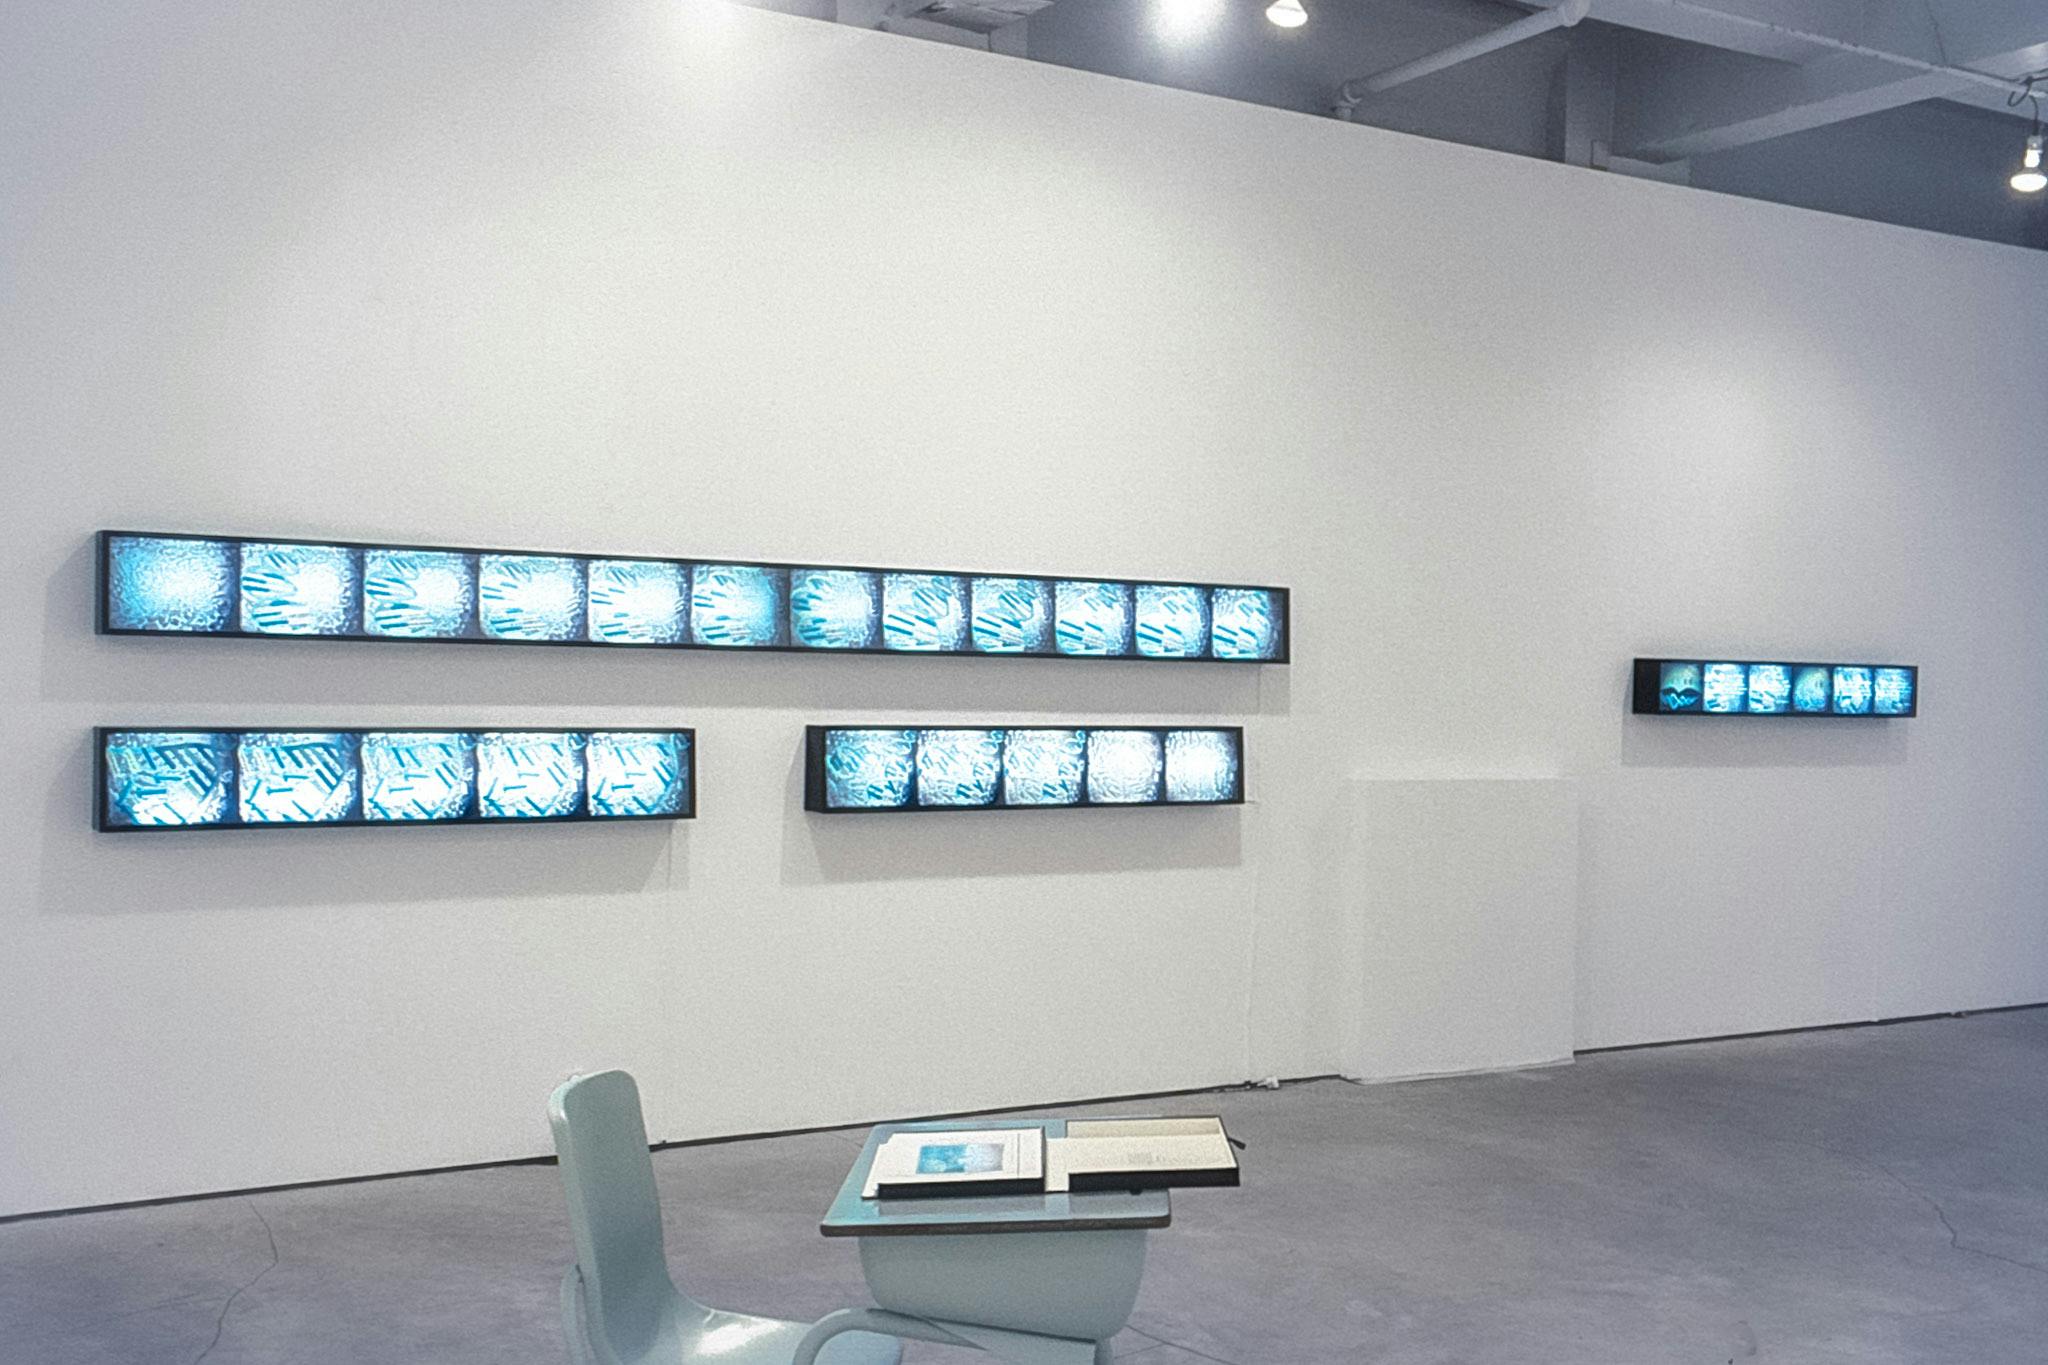 Three long strips of video stills mounted on lightboxes on a wall. The stills are blue and white and show stages of DNA duplication. In the foreground, there is a school desk with more stills in it. 